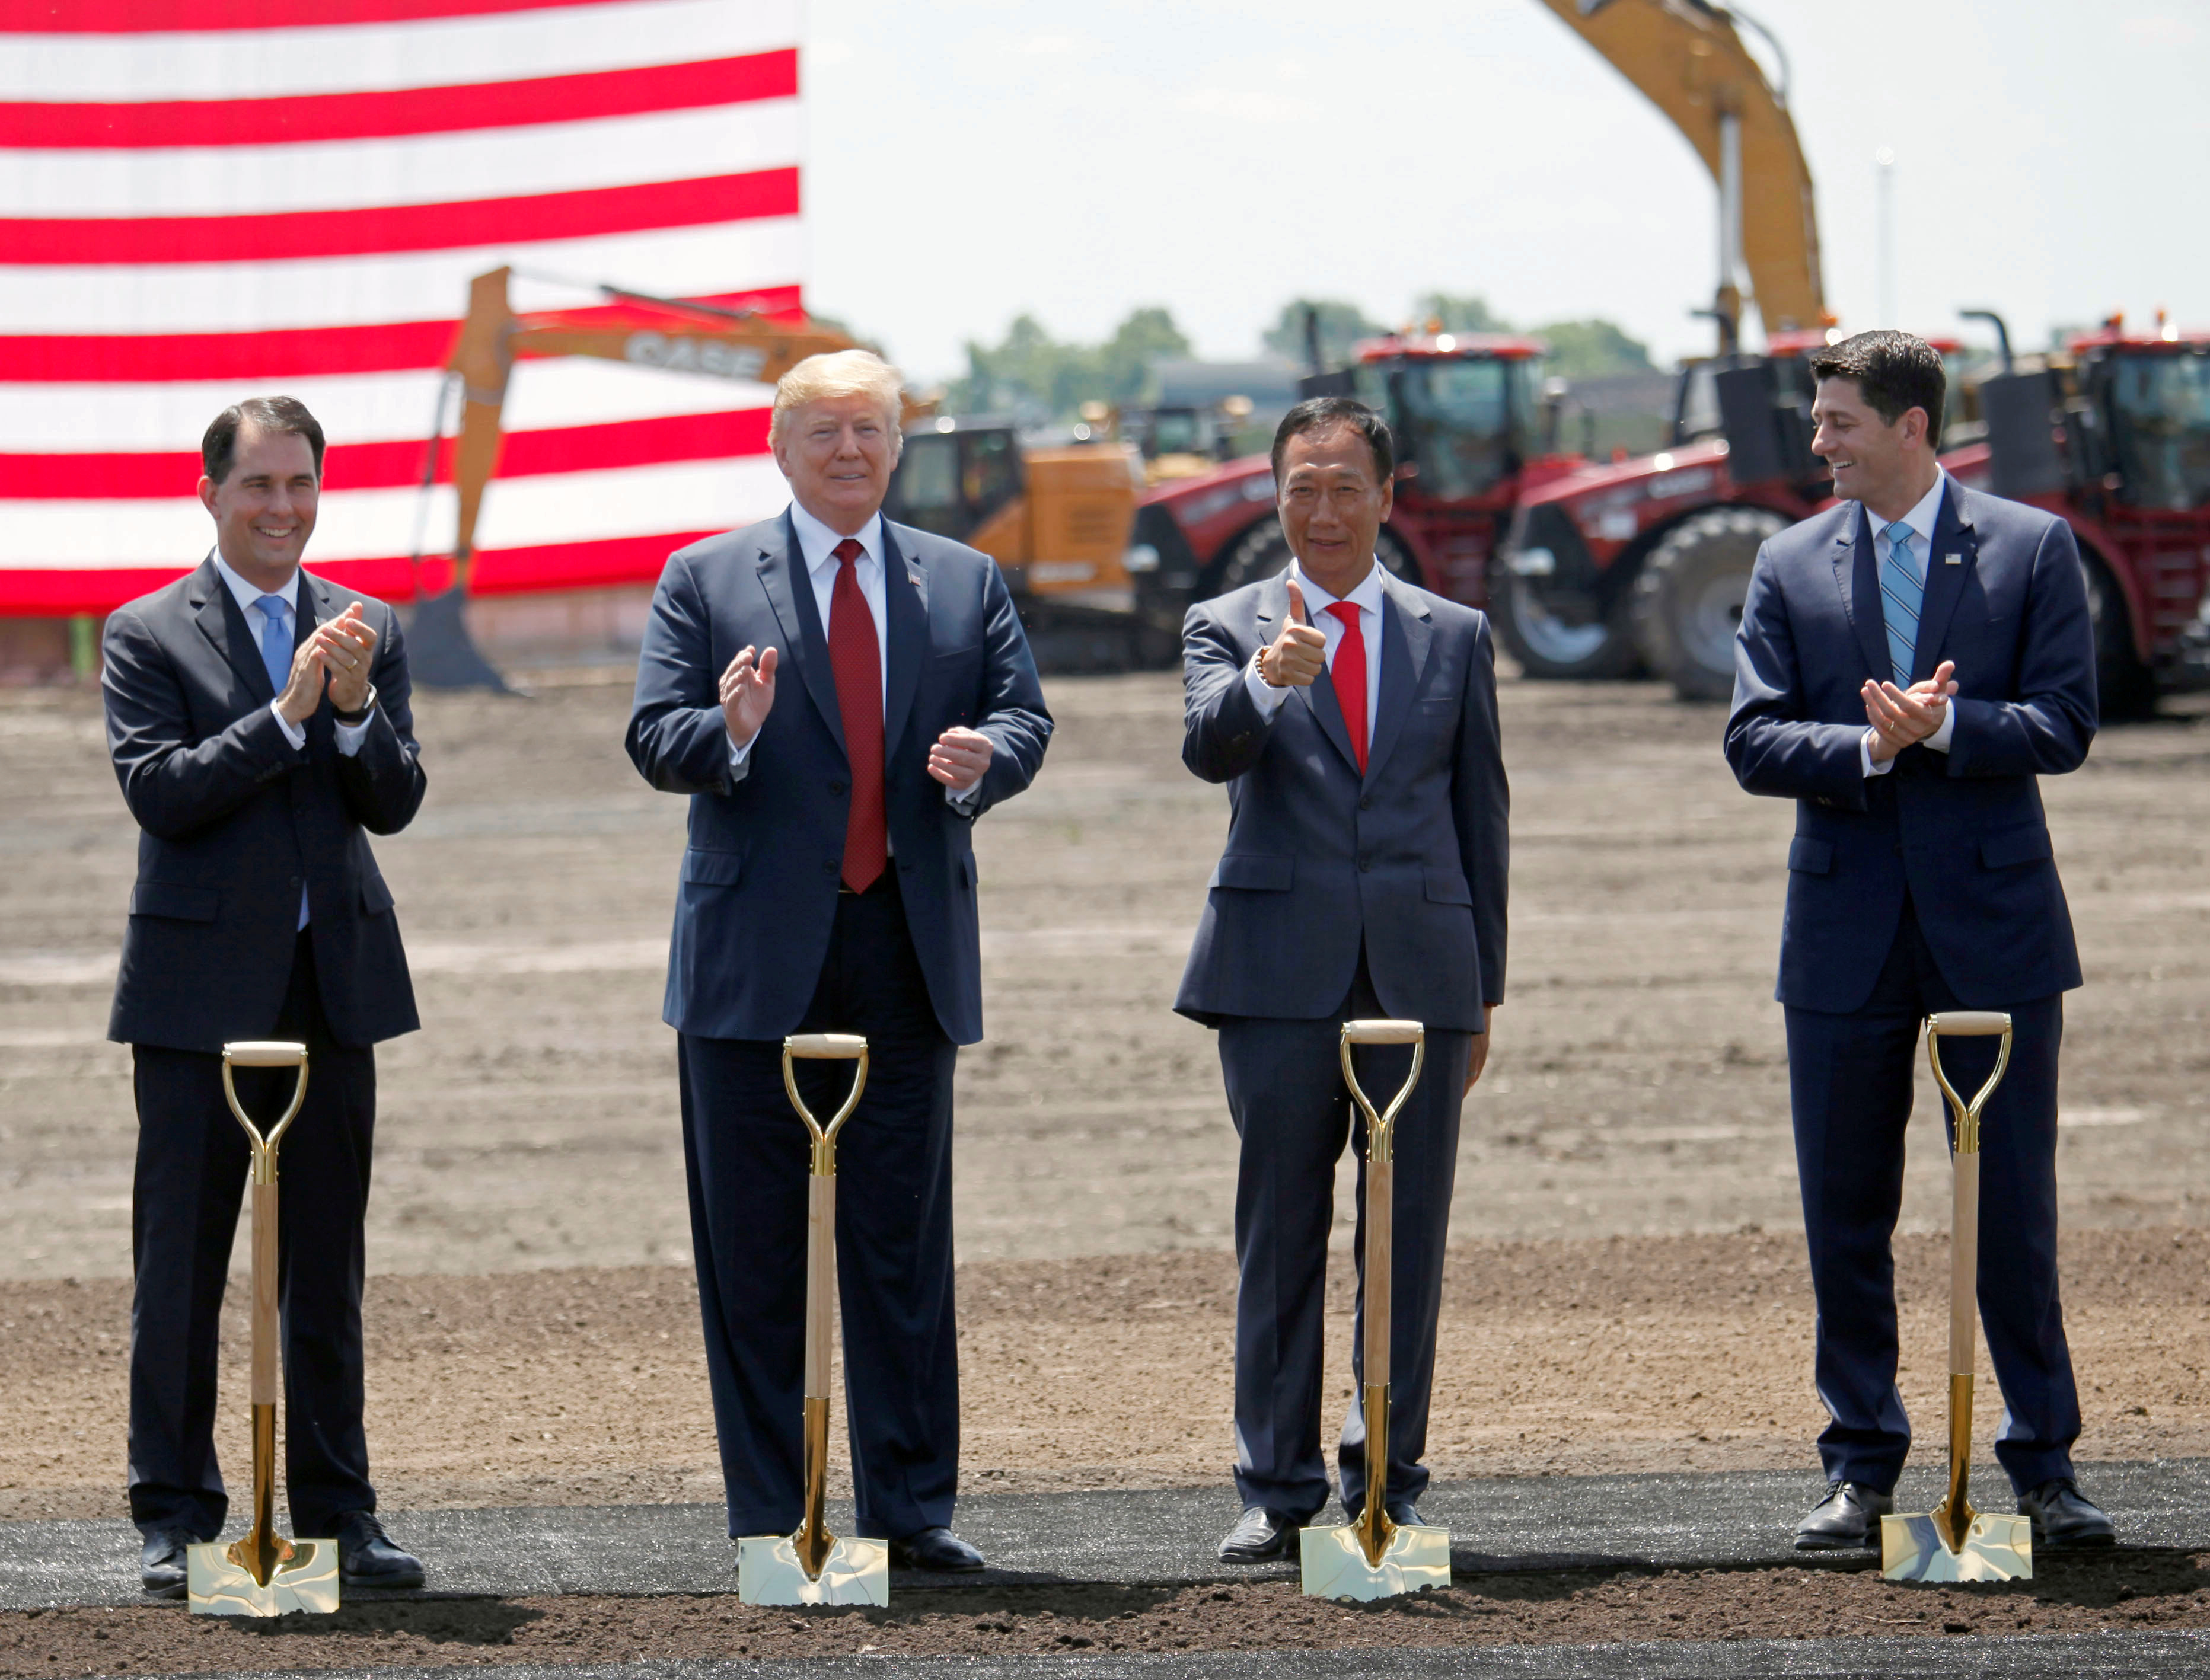 U.S. President Donald Trump participates in the Foxconn Technology Group groundbreaking ceremony for its LCD manufacturing campus, in Mount Pleasant